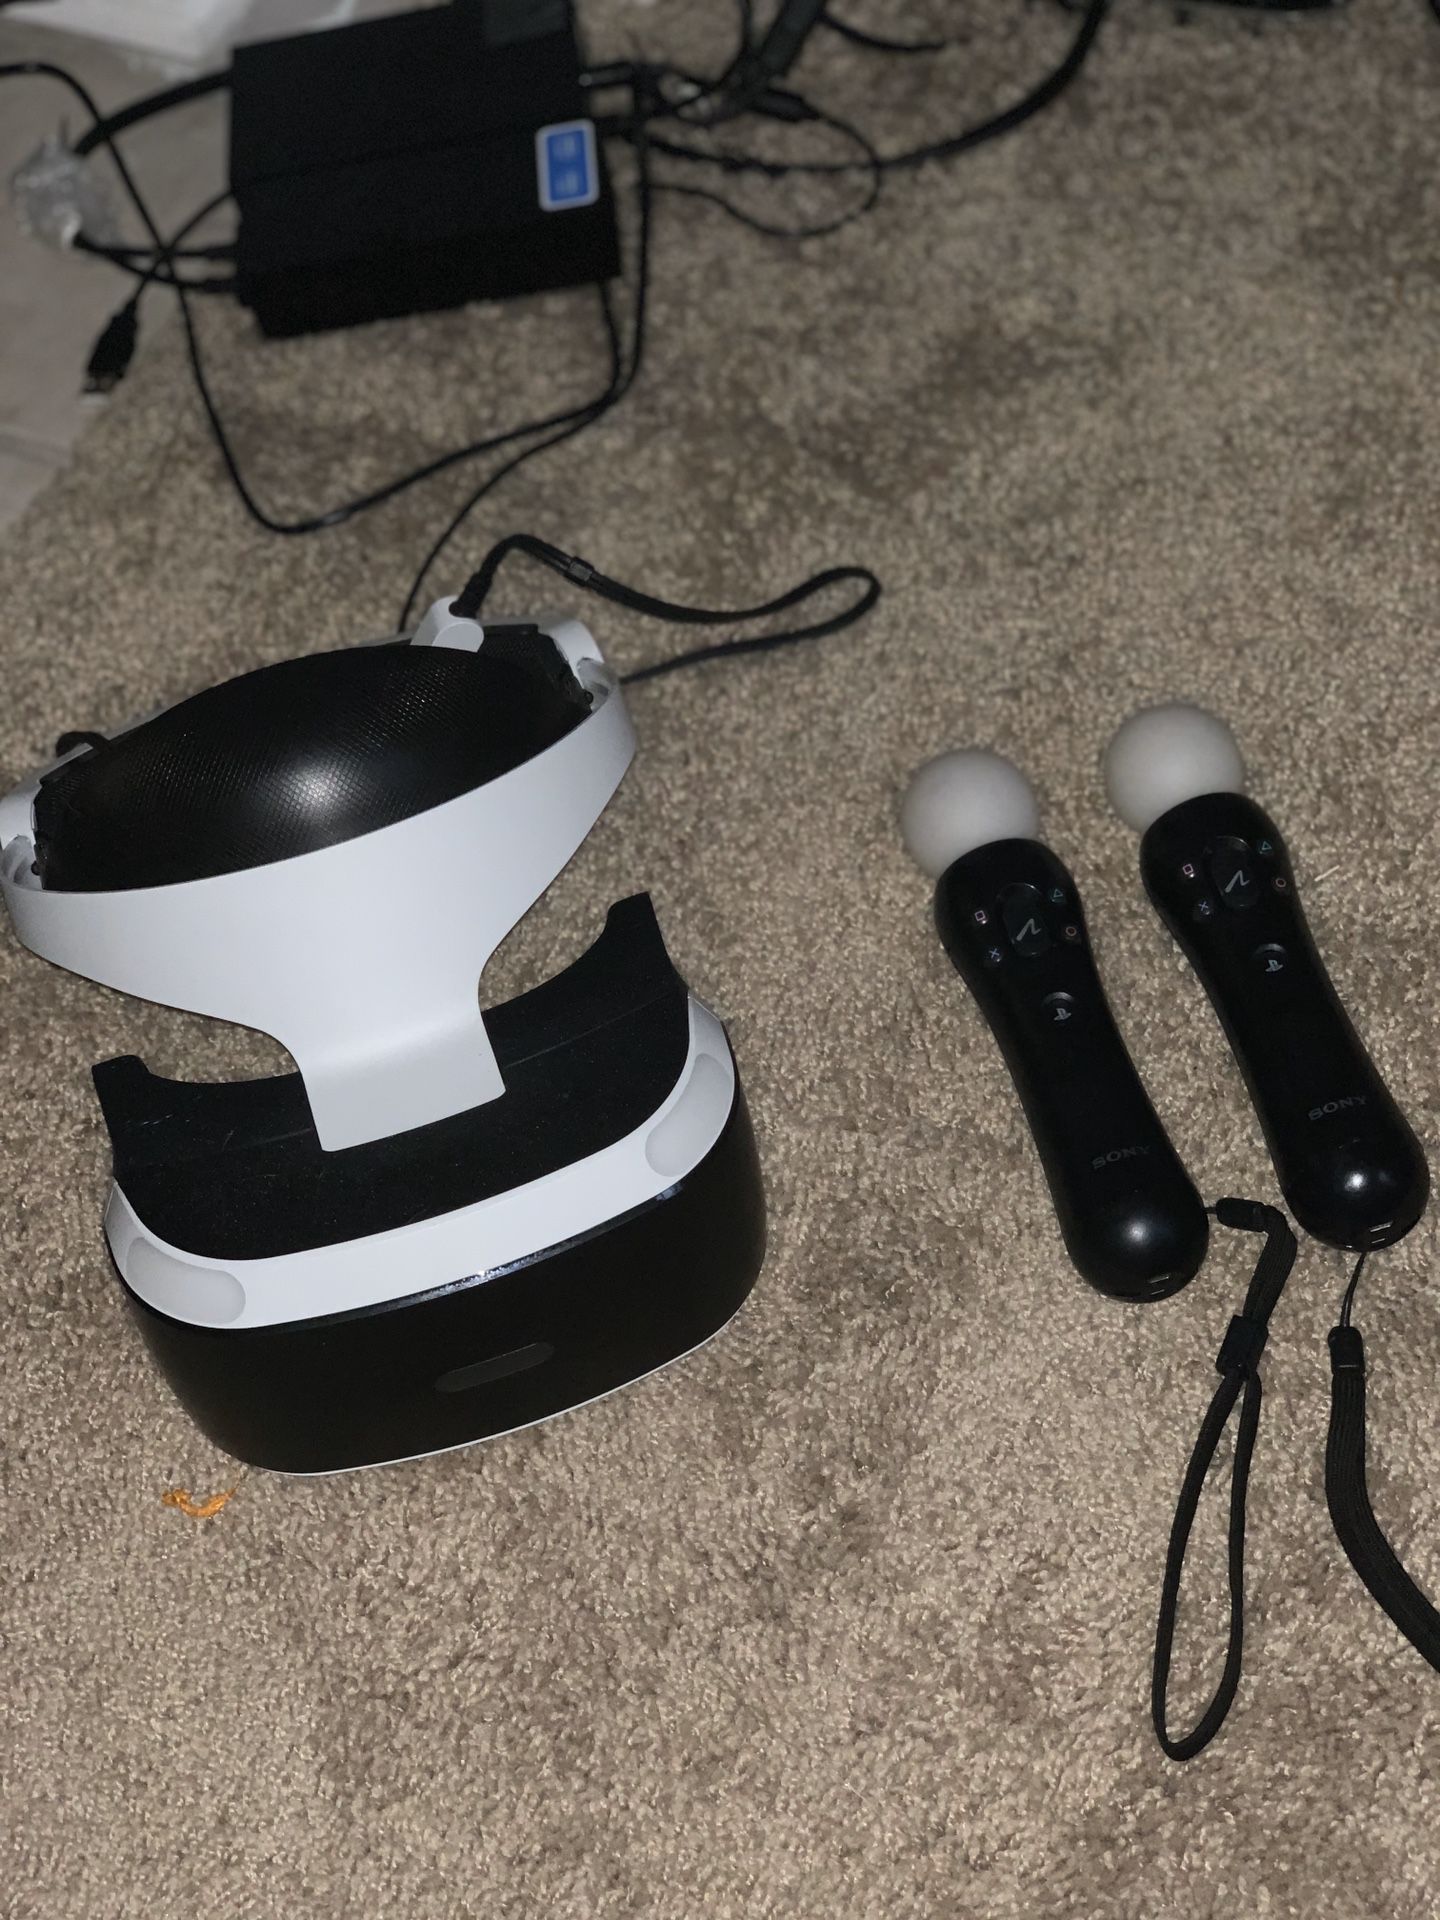 PlayStation VR headset with 2 move controllers